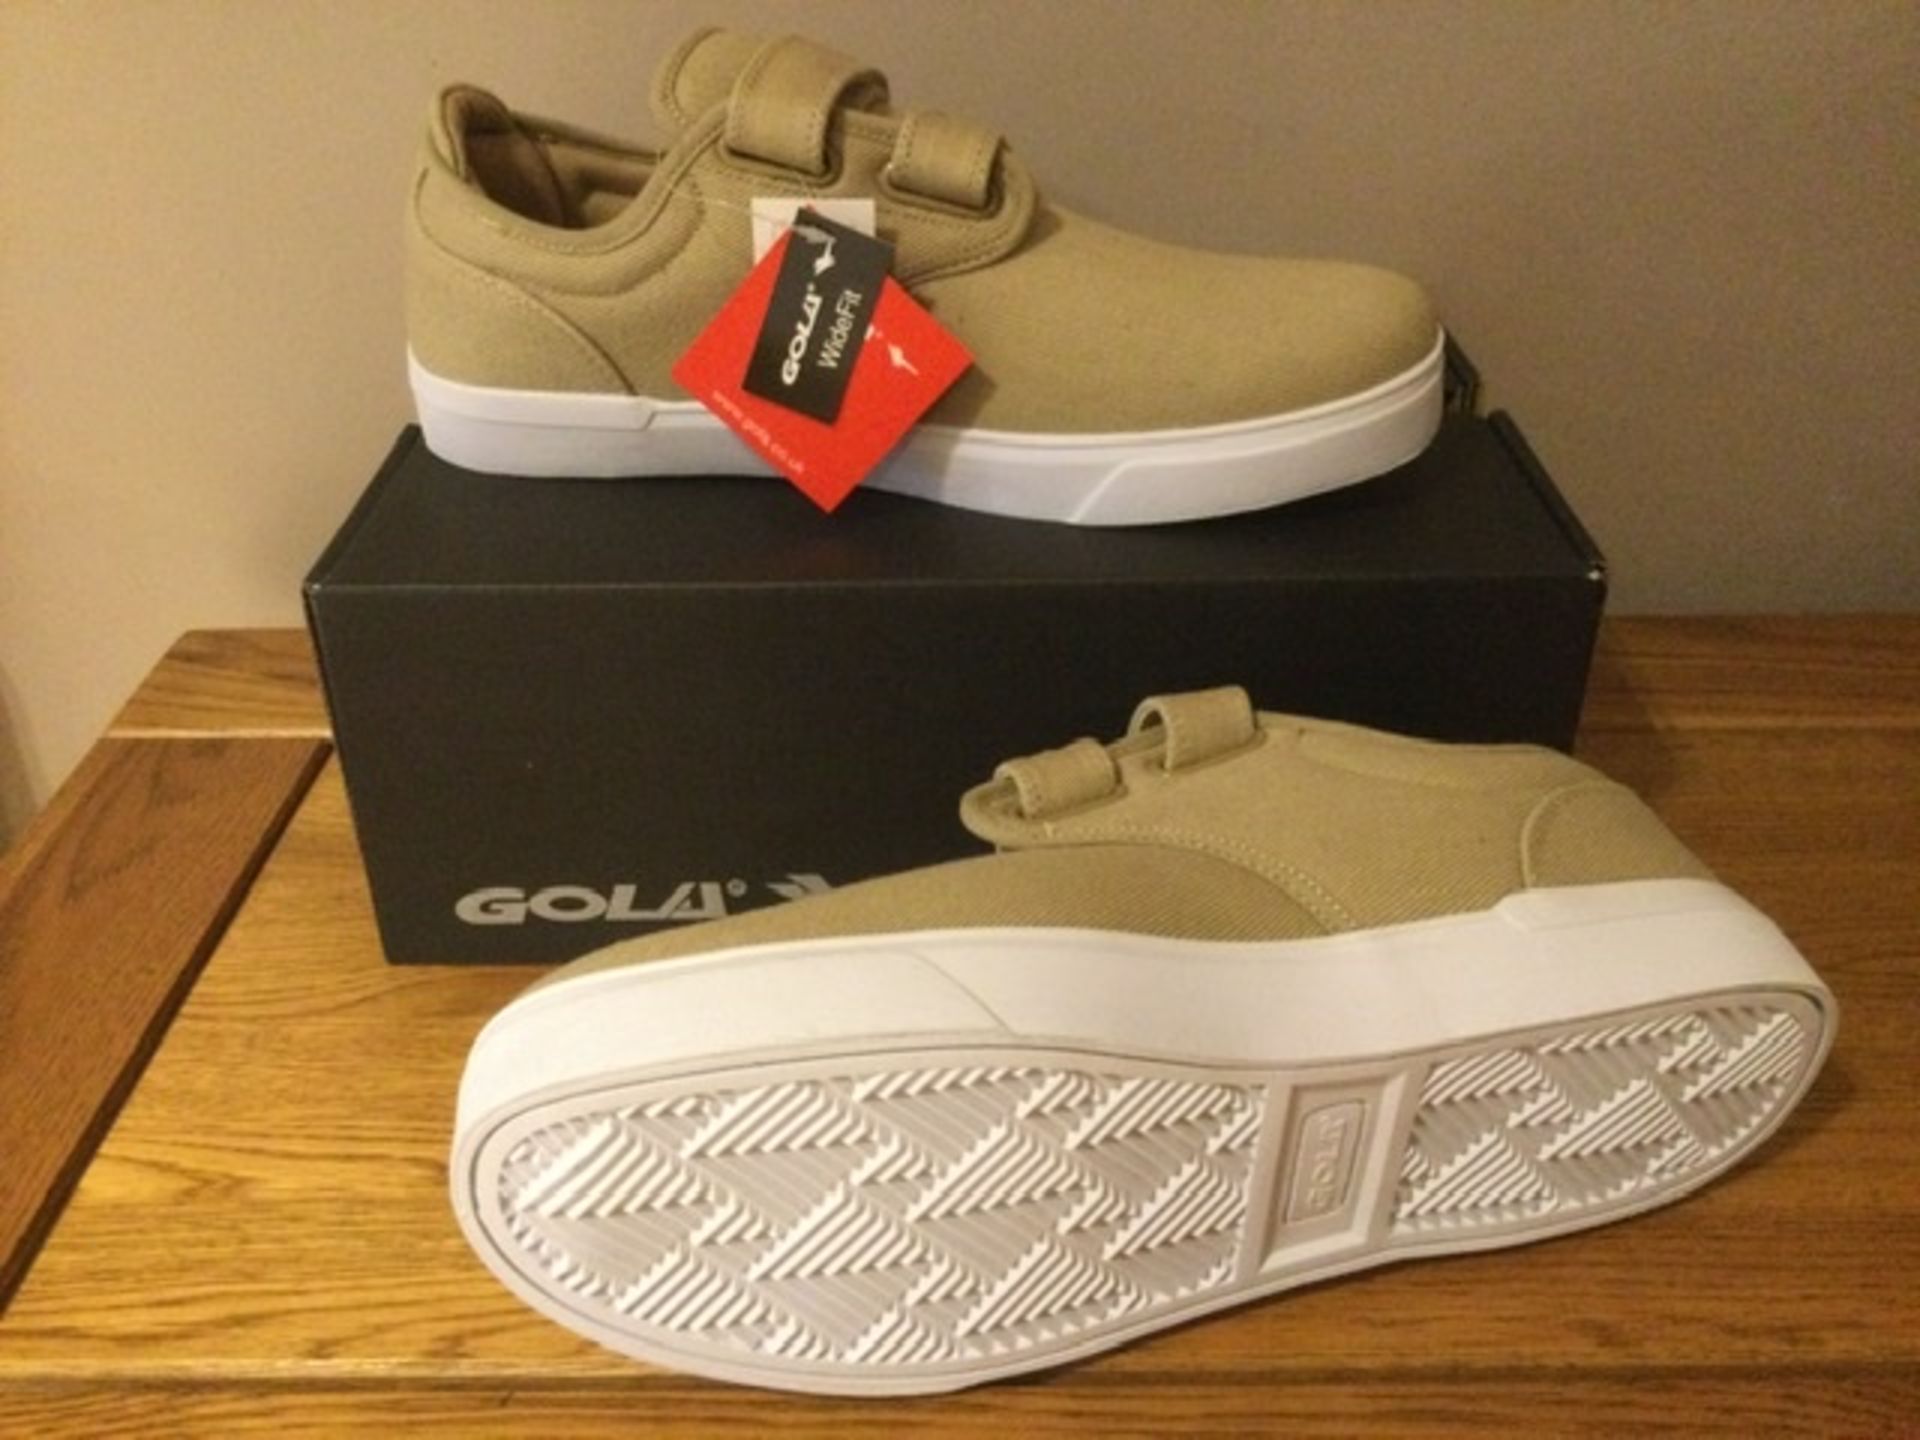 Gola “Panama” QF Men's Wide Fit Trainers, Size 8, Taupe/White - New RRP £36.00 - Image 4 of 5